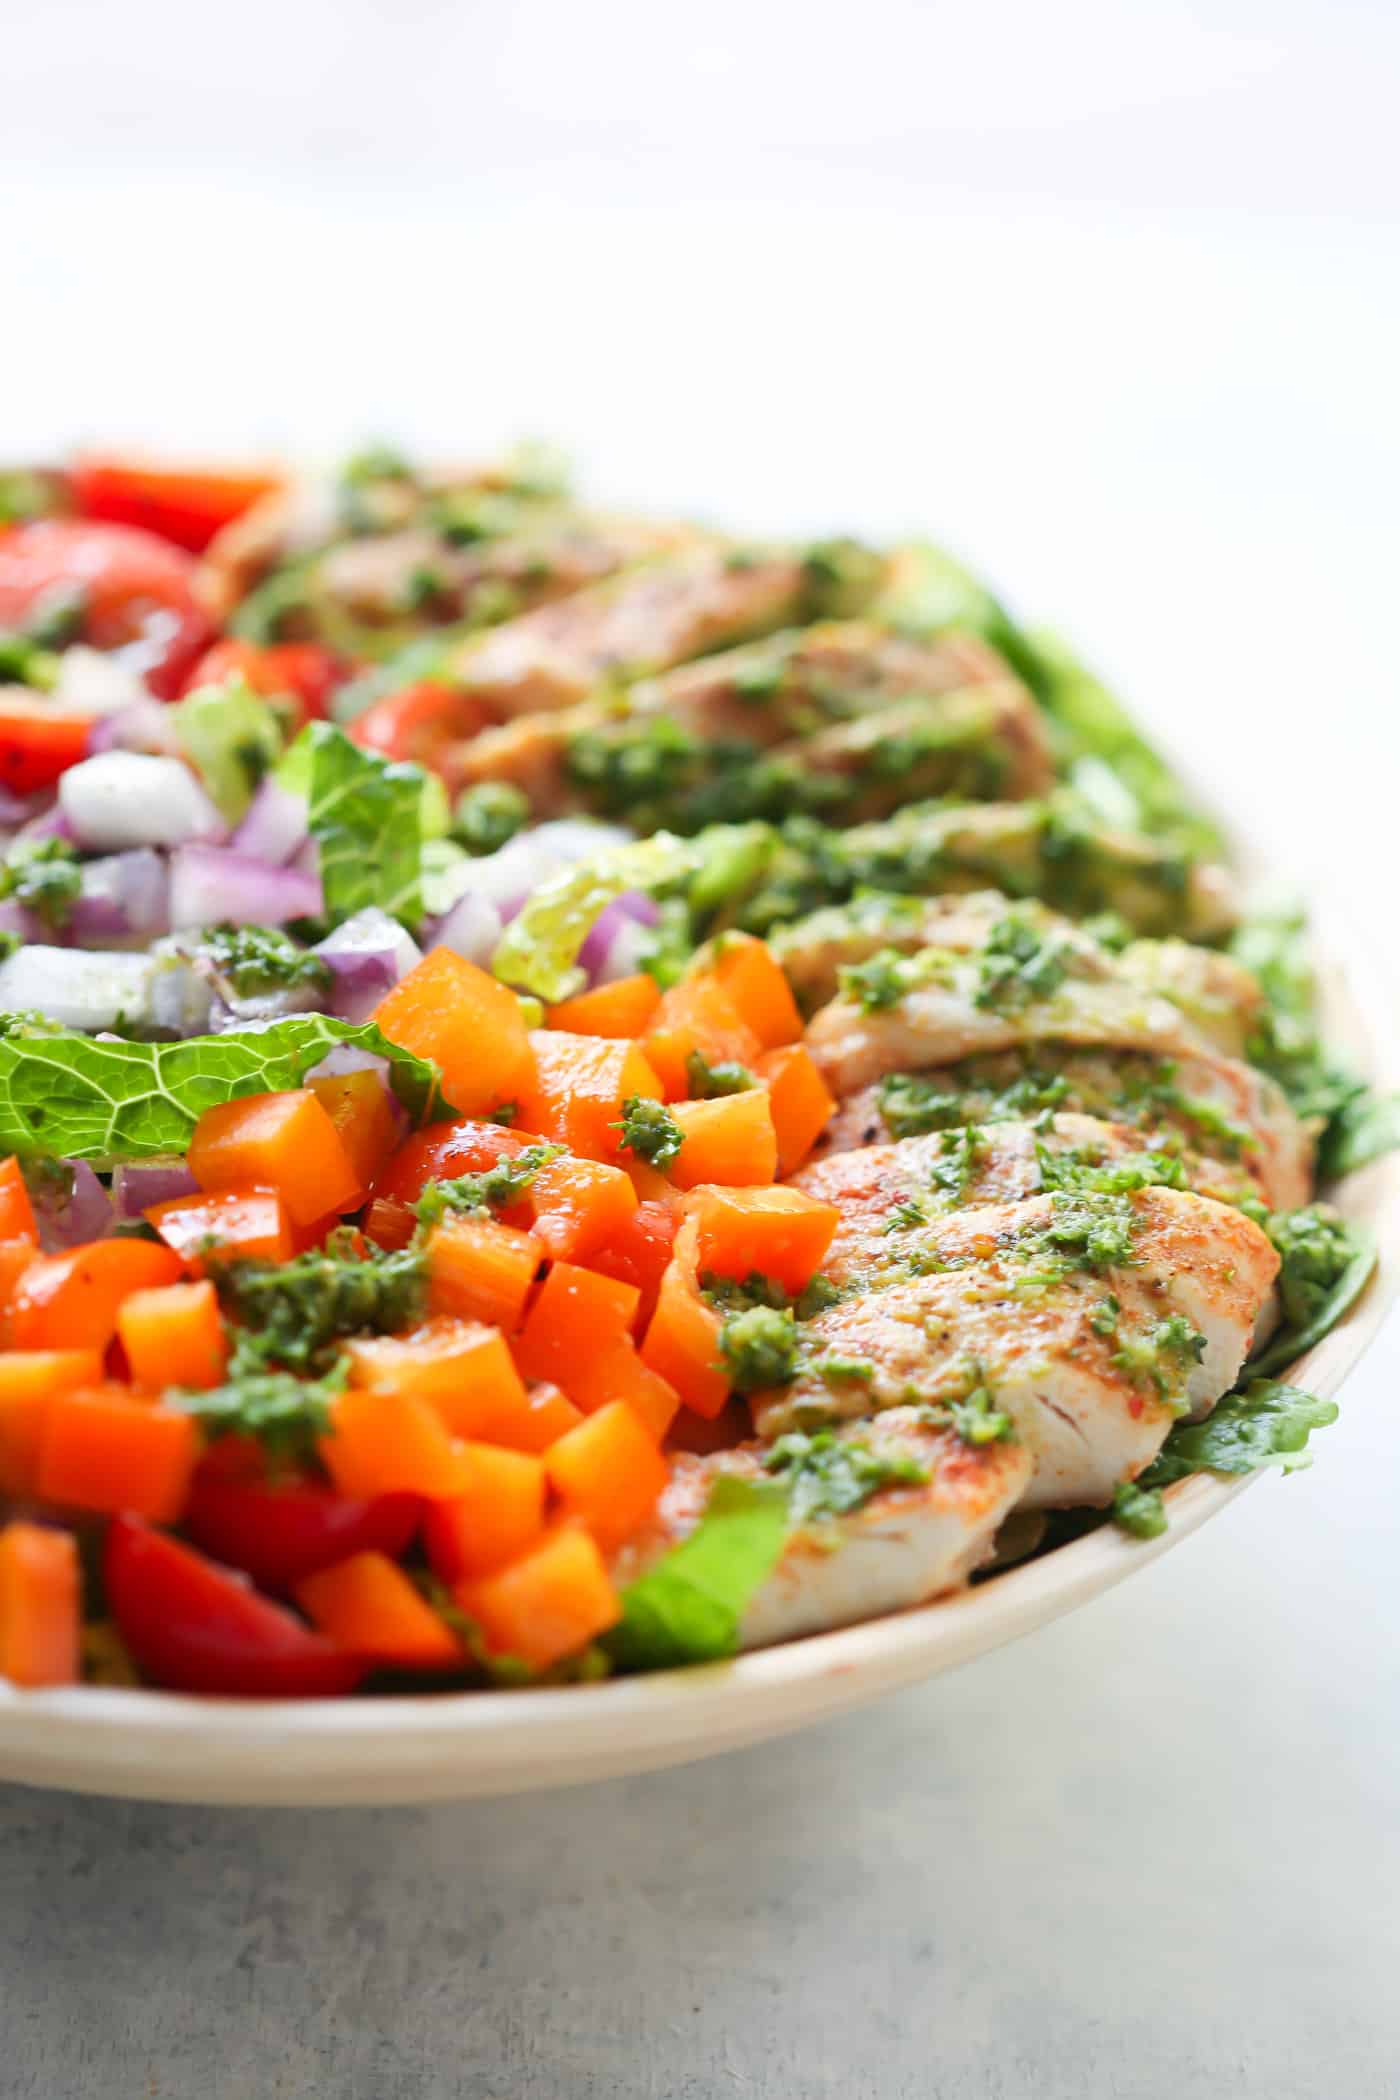 This fresh Chimichurri Chicken Chopped Salad is loaded with lettuces, cherry tomatoes, cucumber, bell pepper, red onions and grilled chicken. It's a complete meal to enjoy this summer!